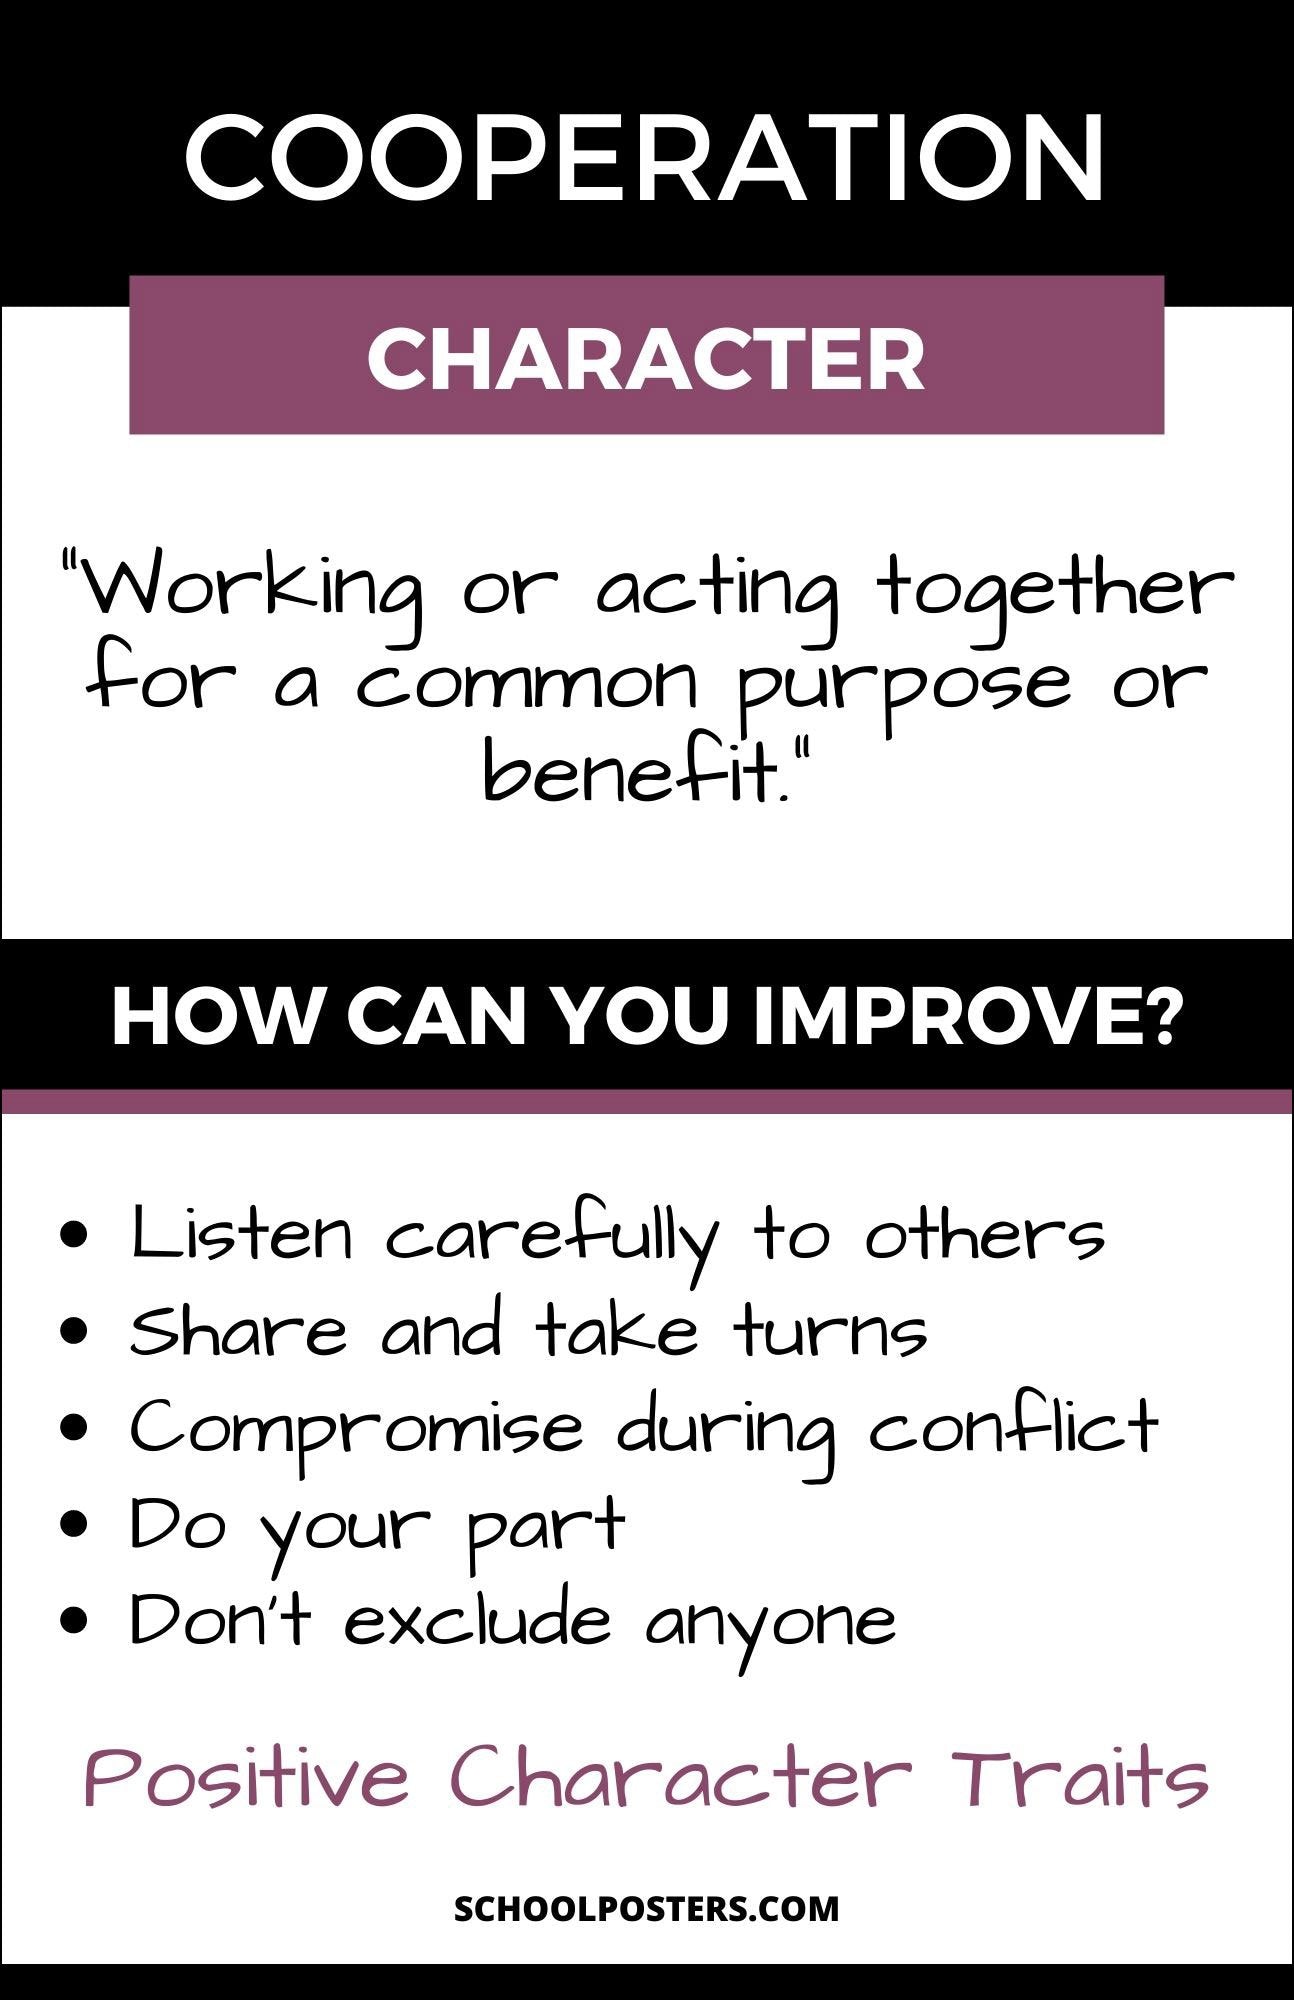 Cooperation Character Trait Poster